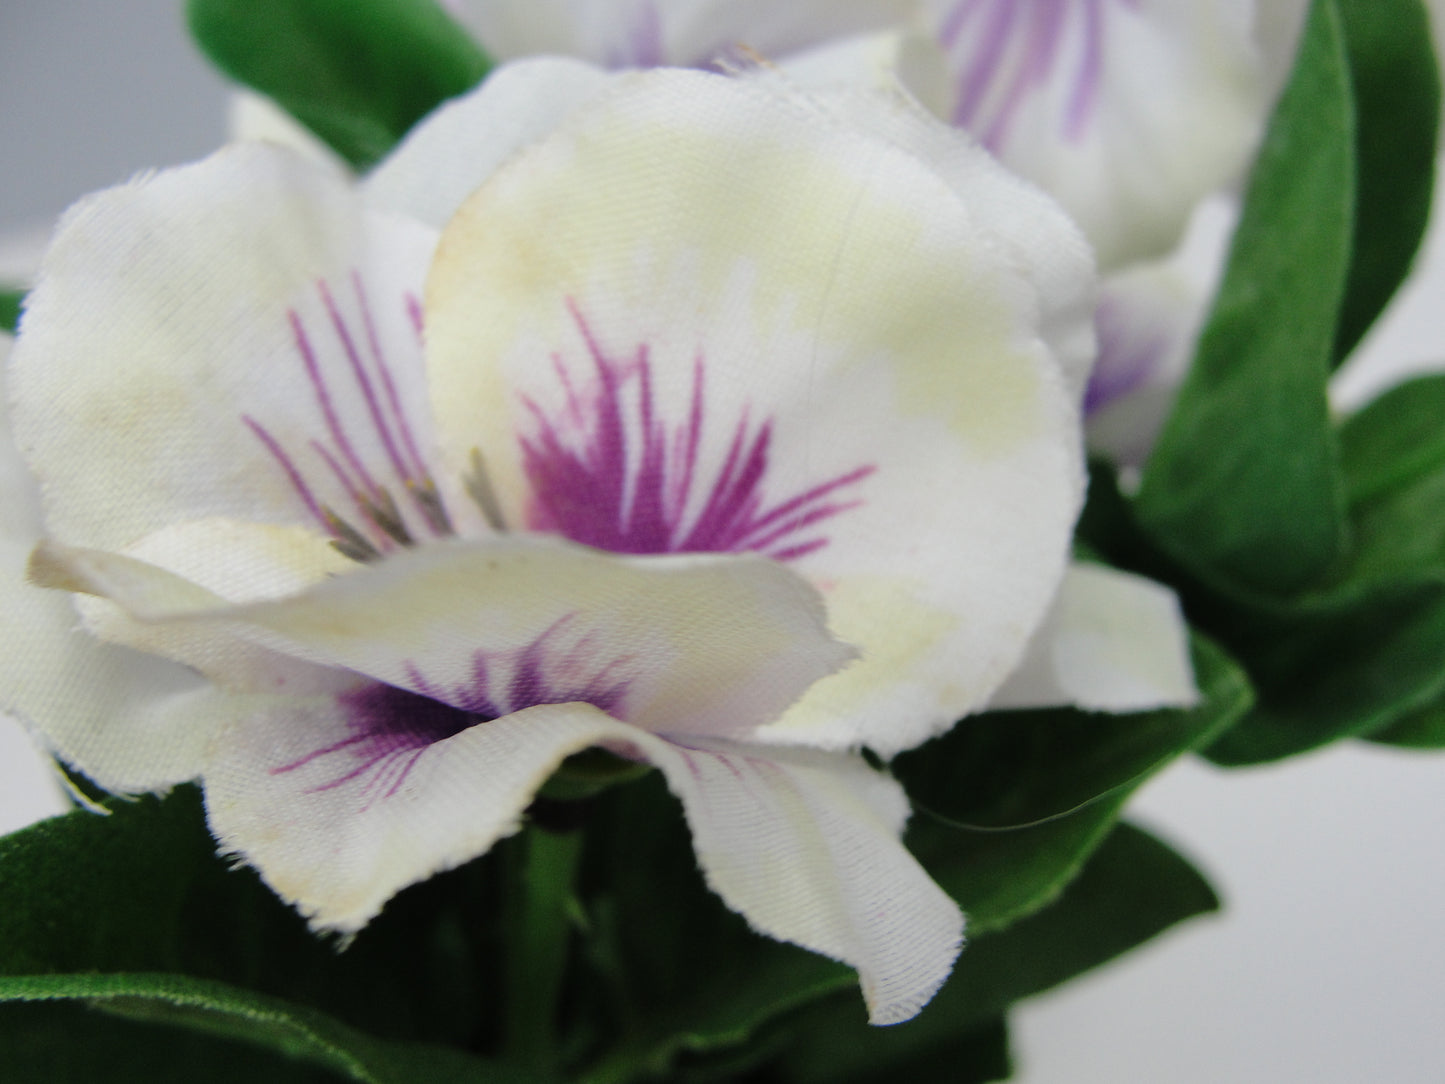 Pansy bush 7 stems floral supplies - Floral Supplies - Craft Supply House